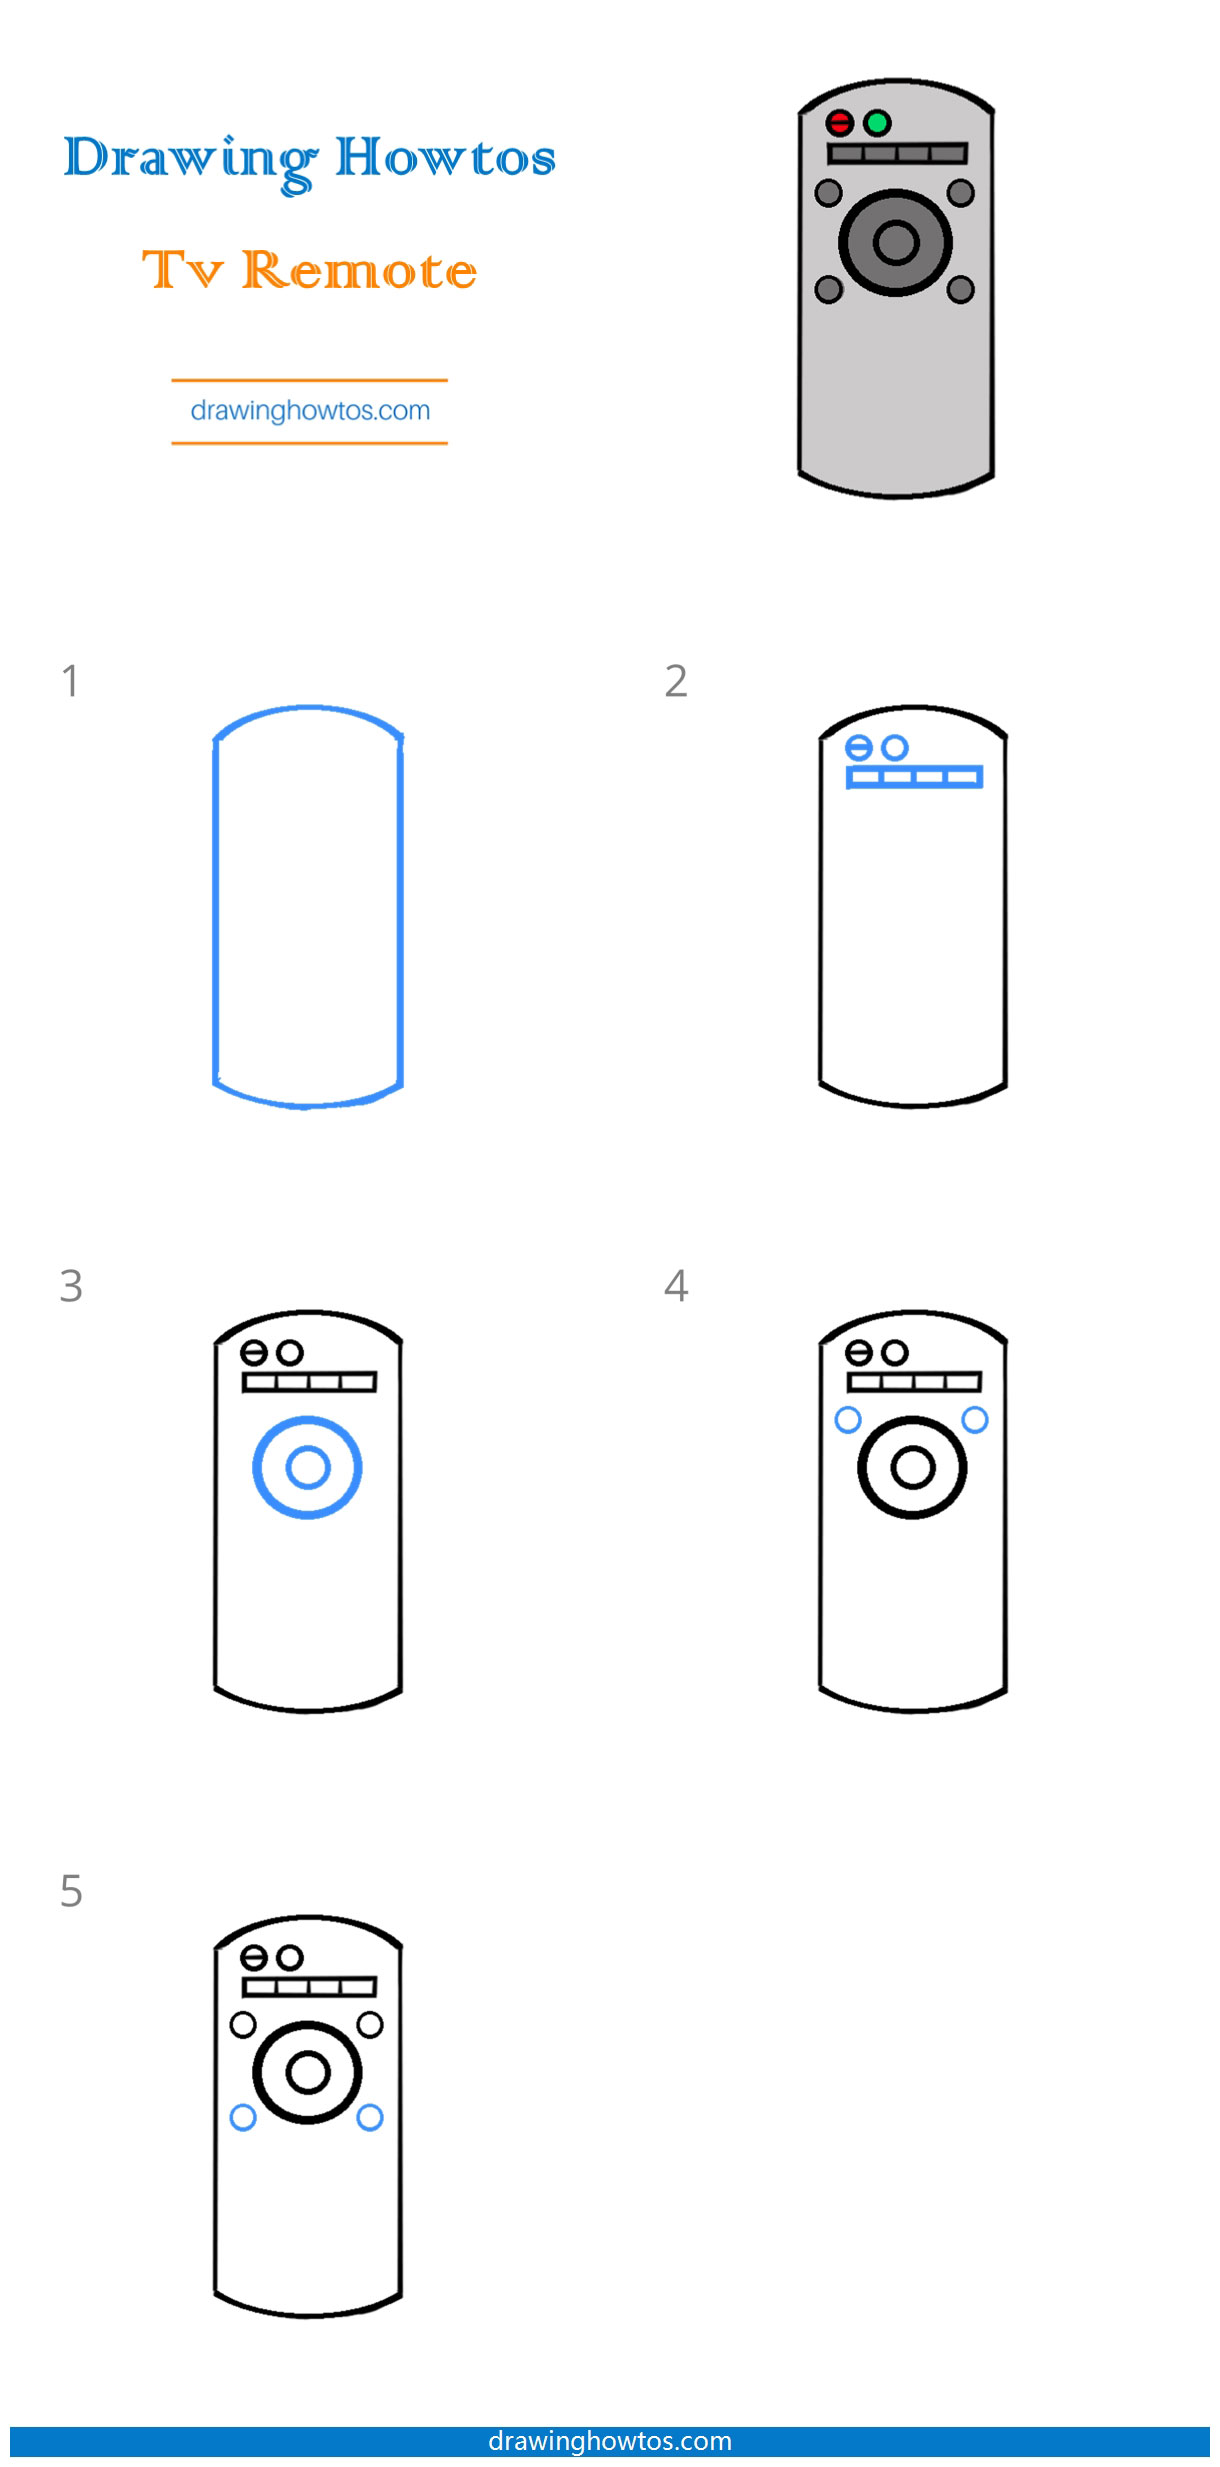 How to Draw a TV Remote Step by Step